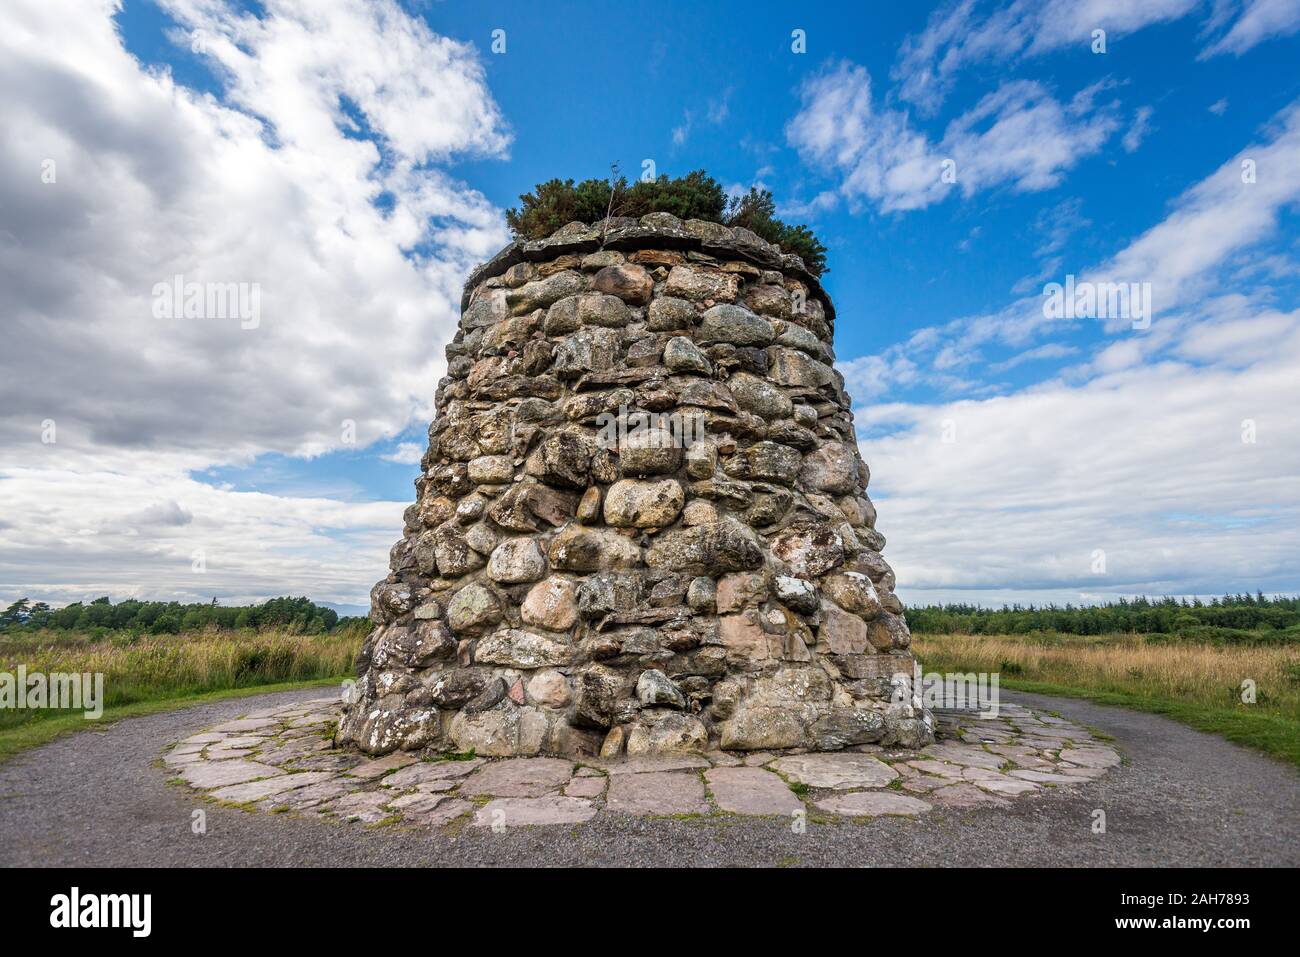 A scottish battle monument consisting in a mount made of stones against a blue sky with clouds Stock Photo